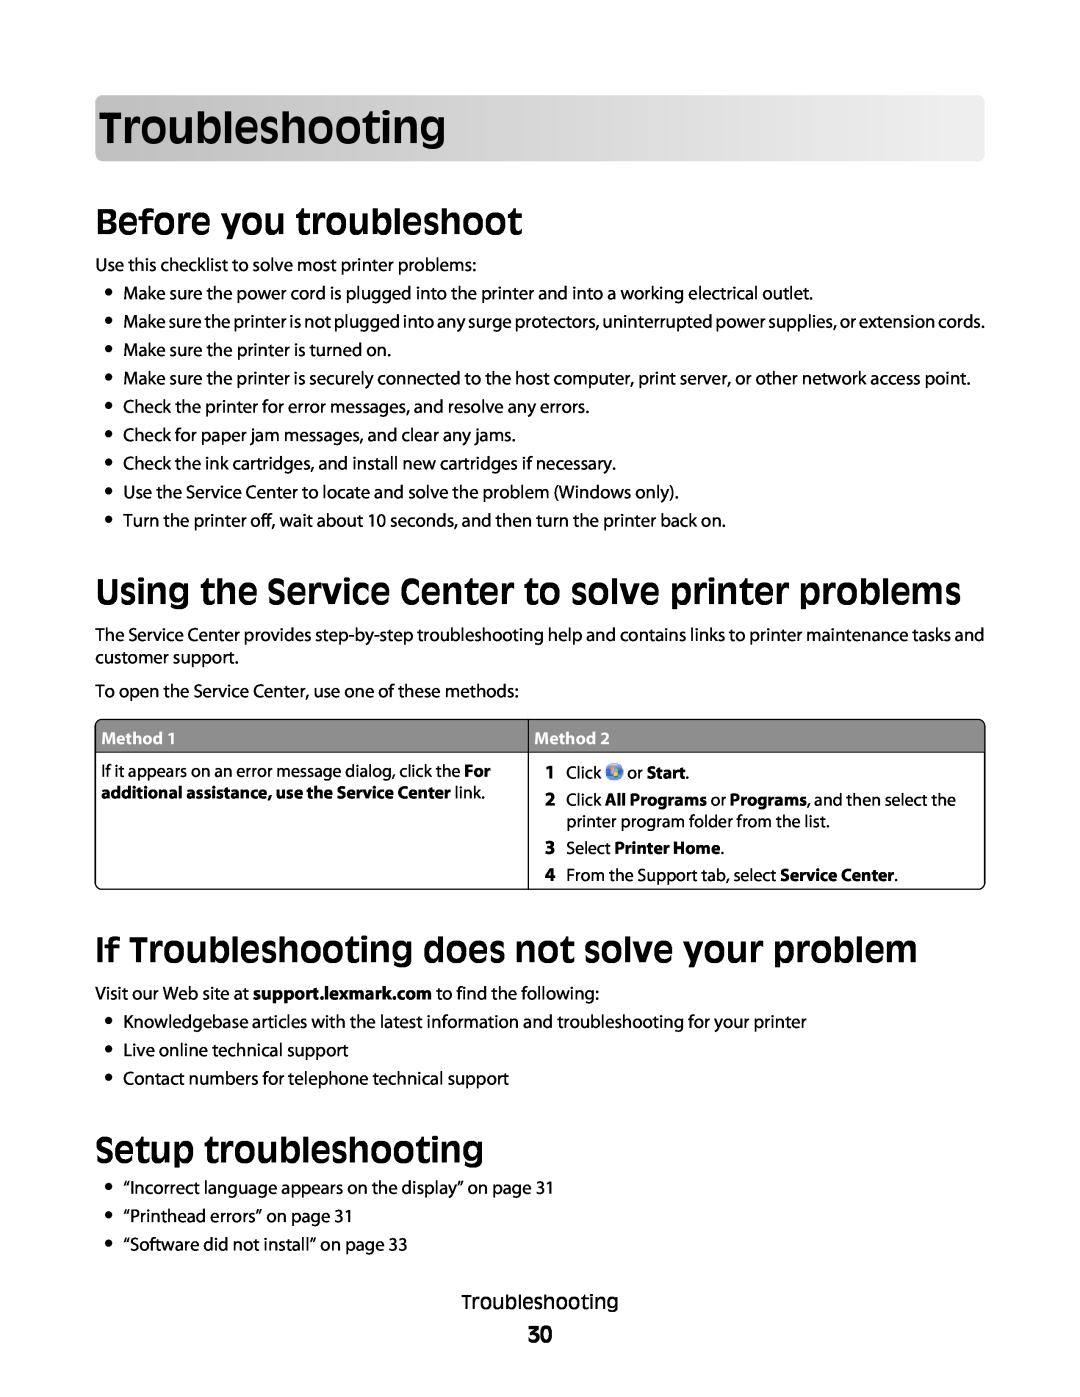 Lexmark S300 manual Before you troubleshoot, If Troubleshooting does not solve your problem, Setup troubleshooting 